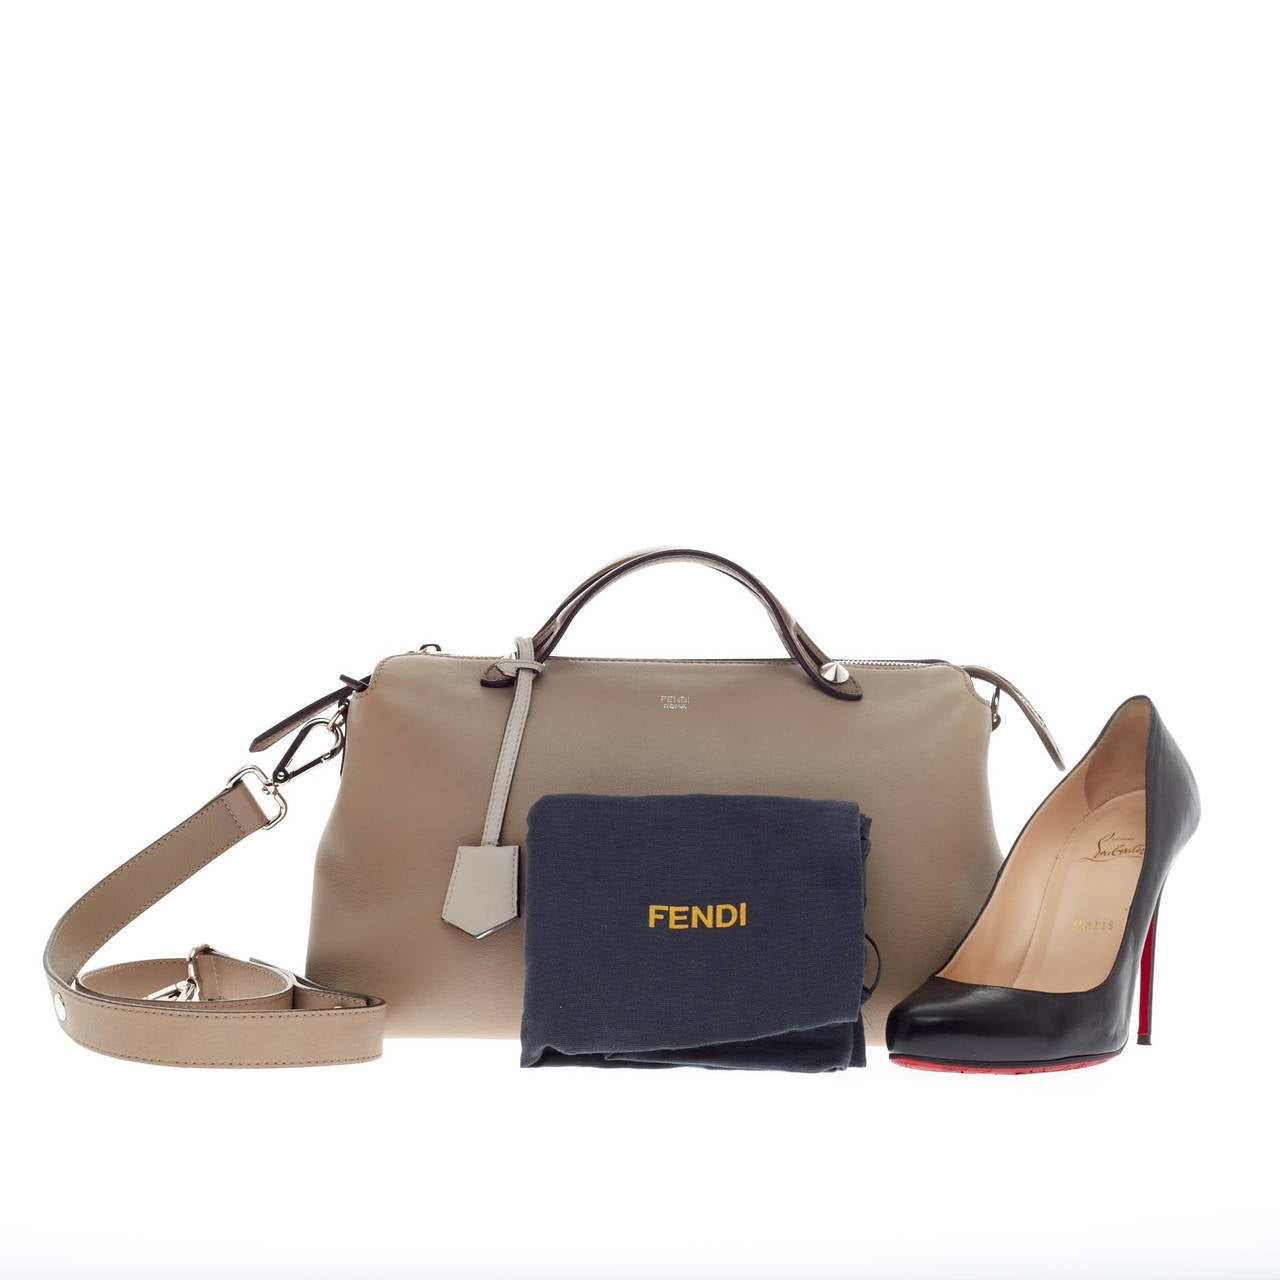 This authentic Fendi By The Way Satchel Calfskin Large showcases a modern, understated style admired by every fashionista. Constructed from smooth neutral taupe and brown calfskin leather, this minimalist and functional duffle features dual flat top